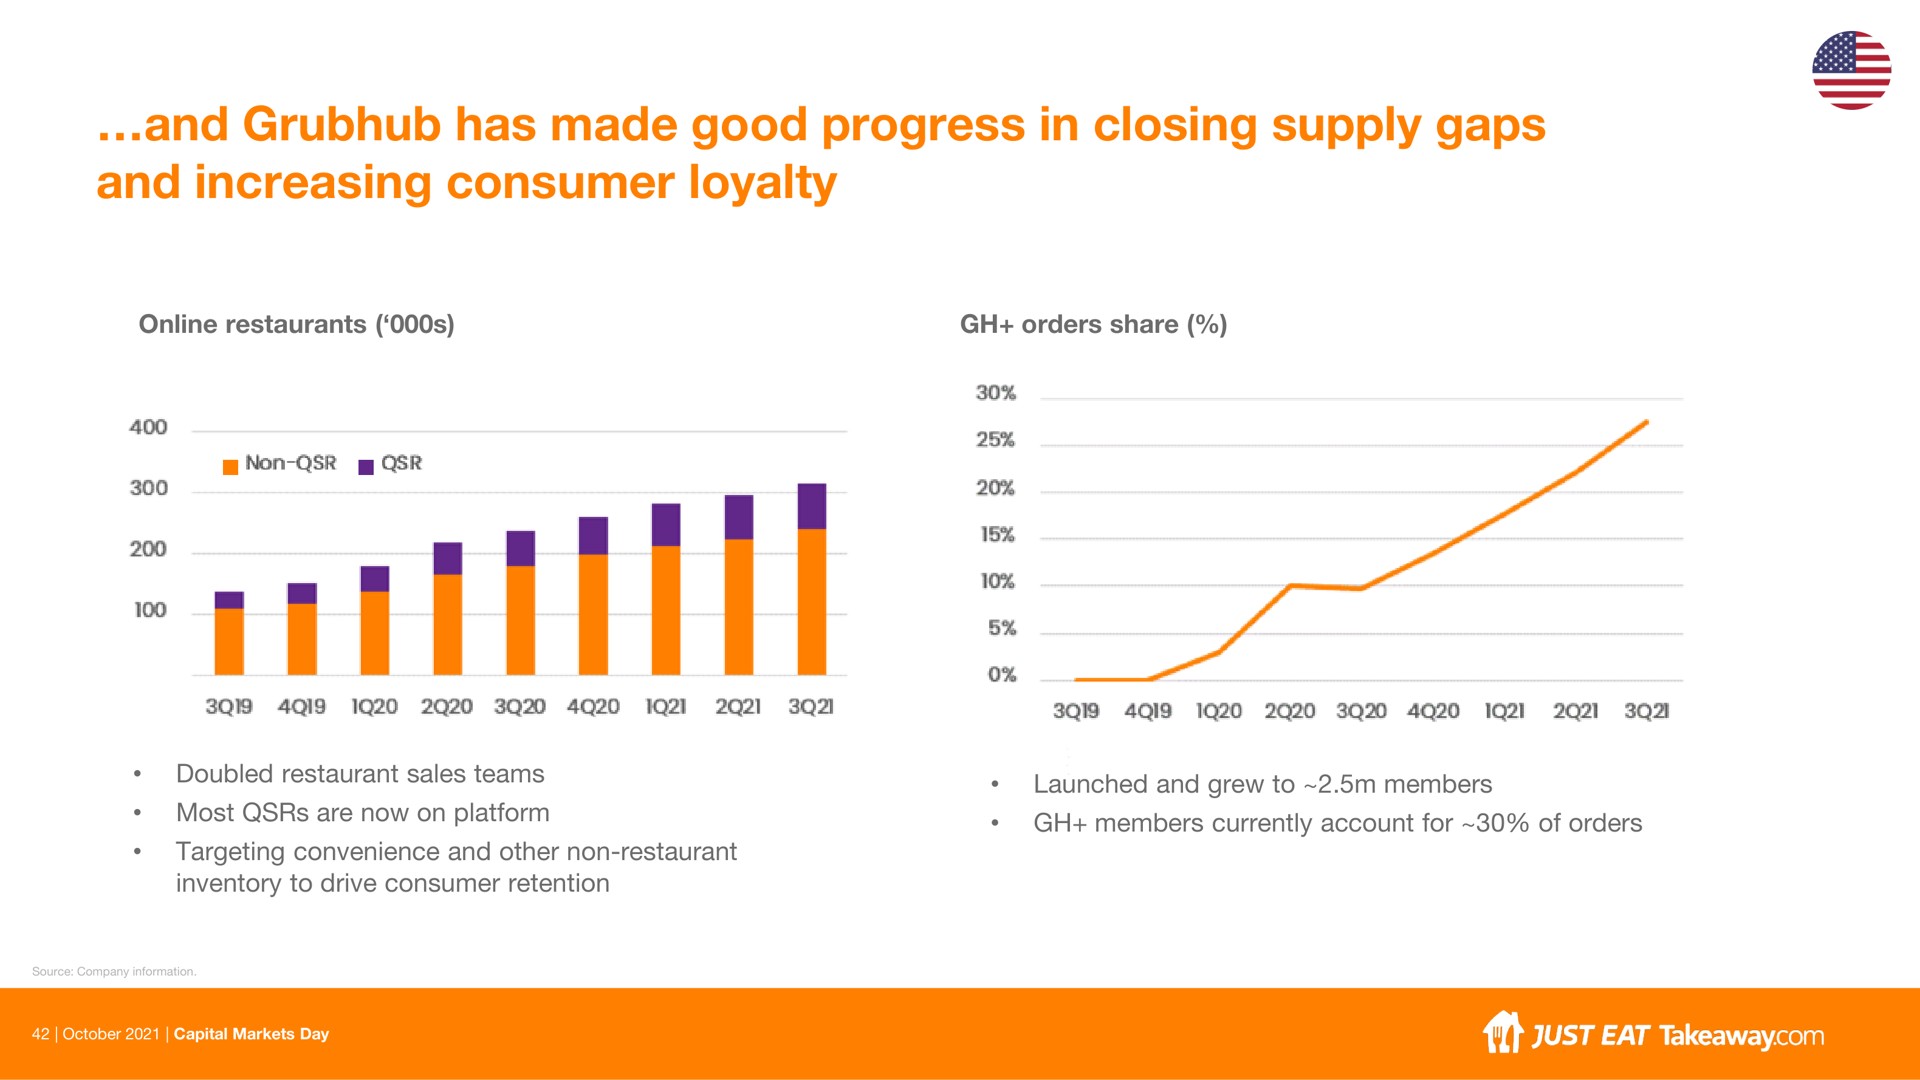 and has made good progress in closing supply gaps and increasing consumer loyalty | Just Eat Takeaway.com